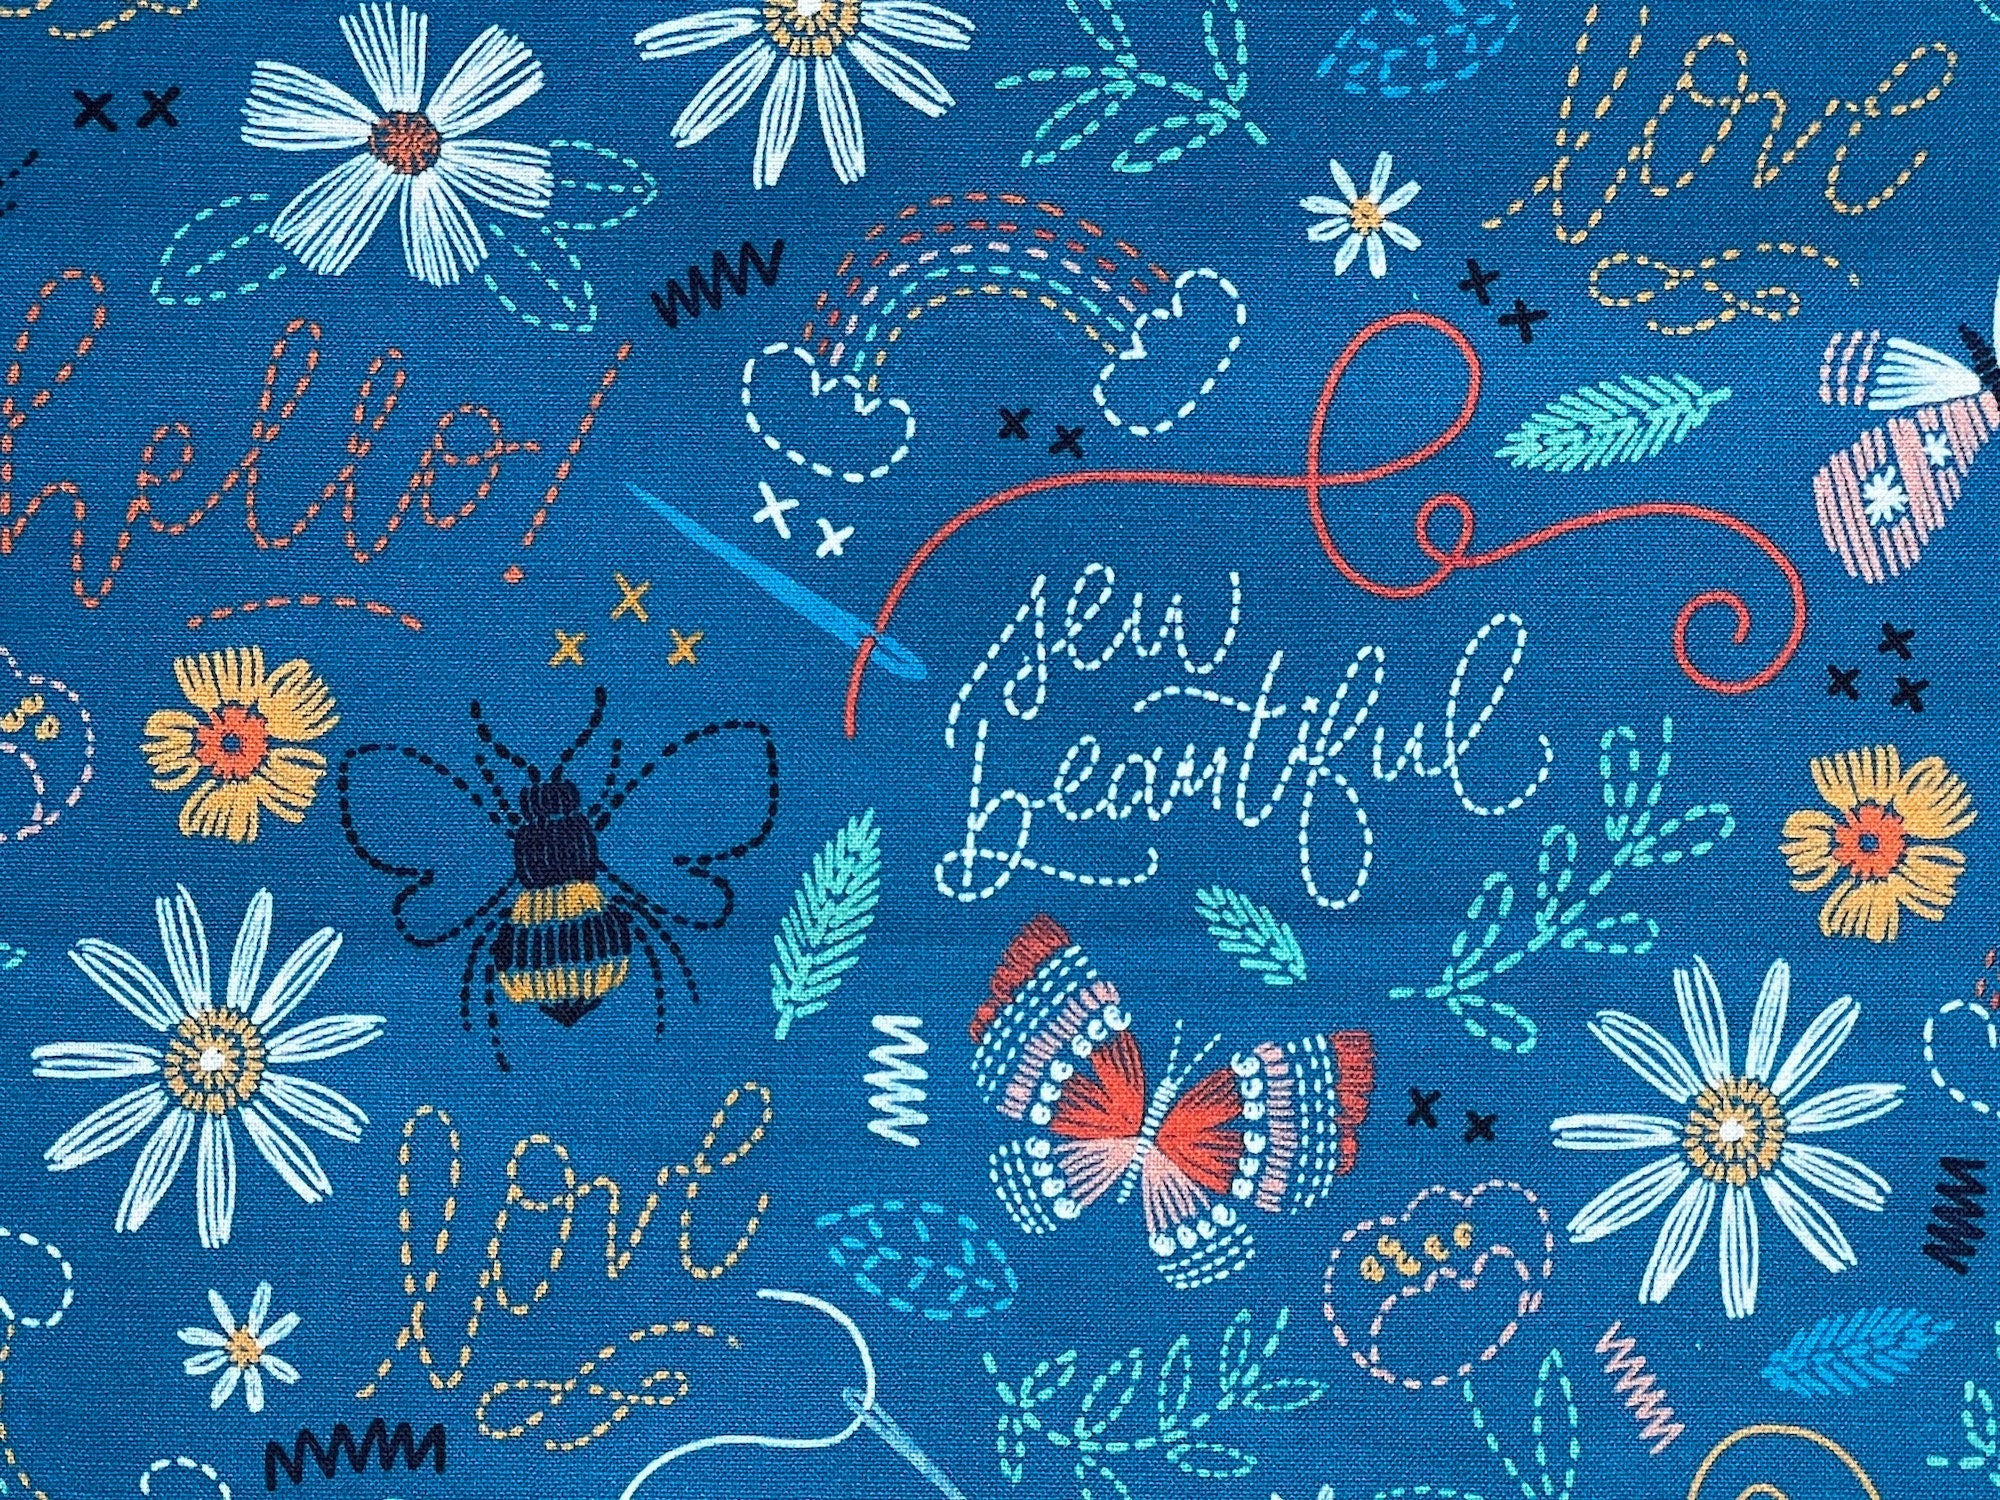 Close up of sayings such as sew beautiful, love, hello and more.